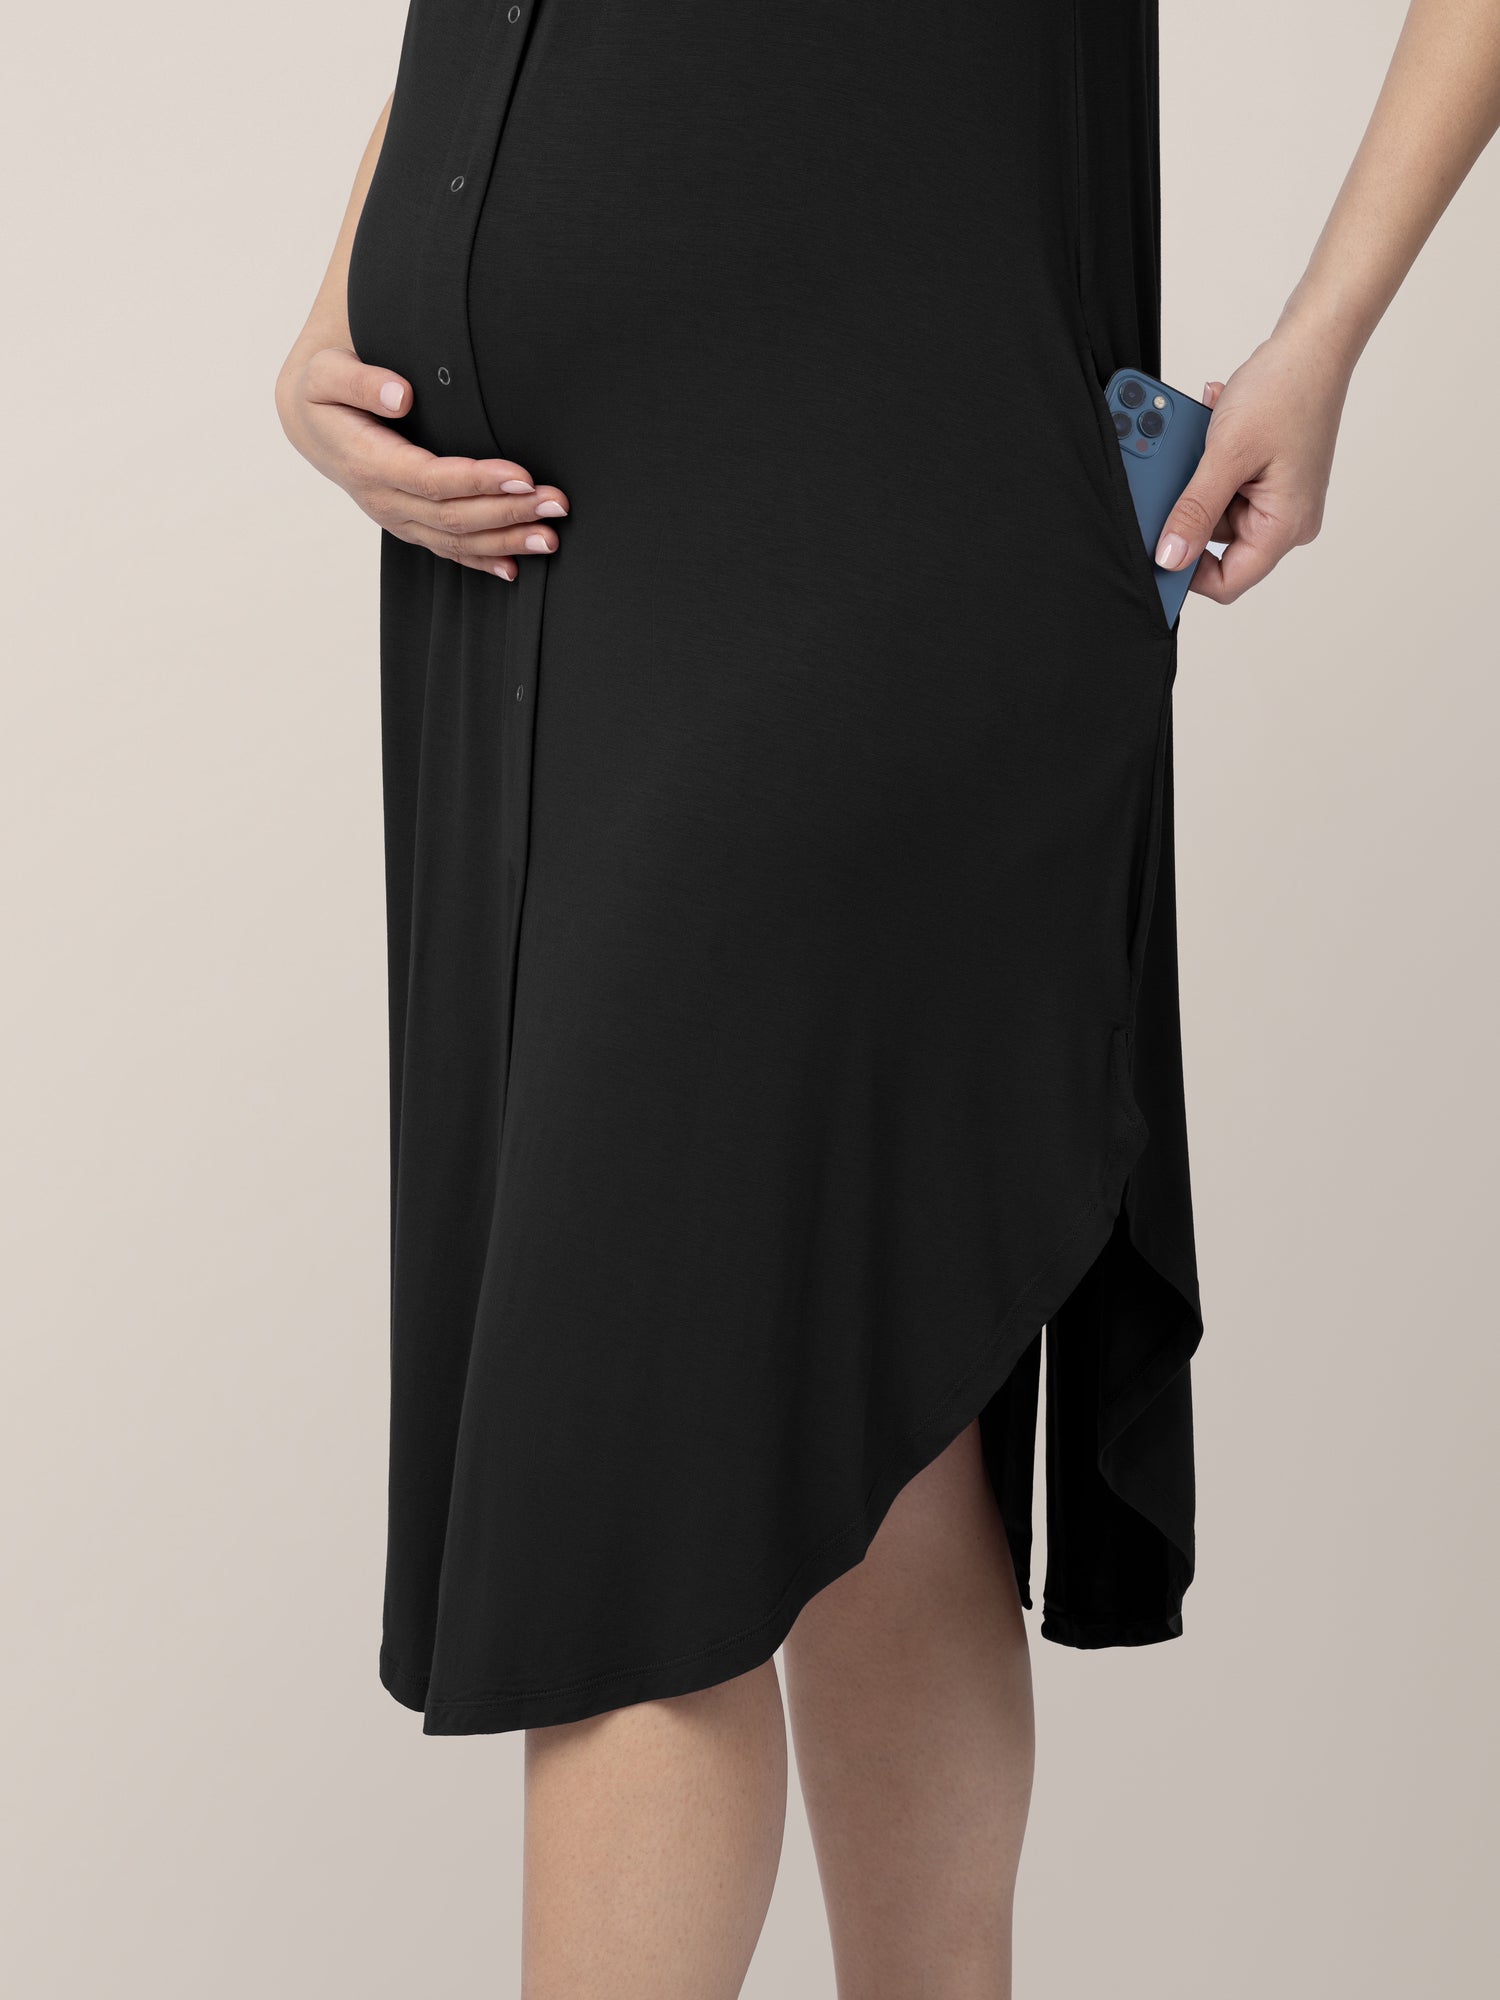 Pregnant model wearing the Ruffle Strap Labor & Delivery Gown in Black showing her phone in the side pocket.